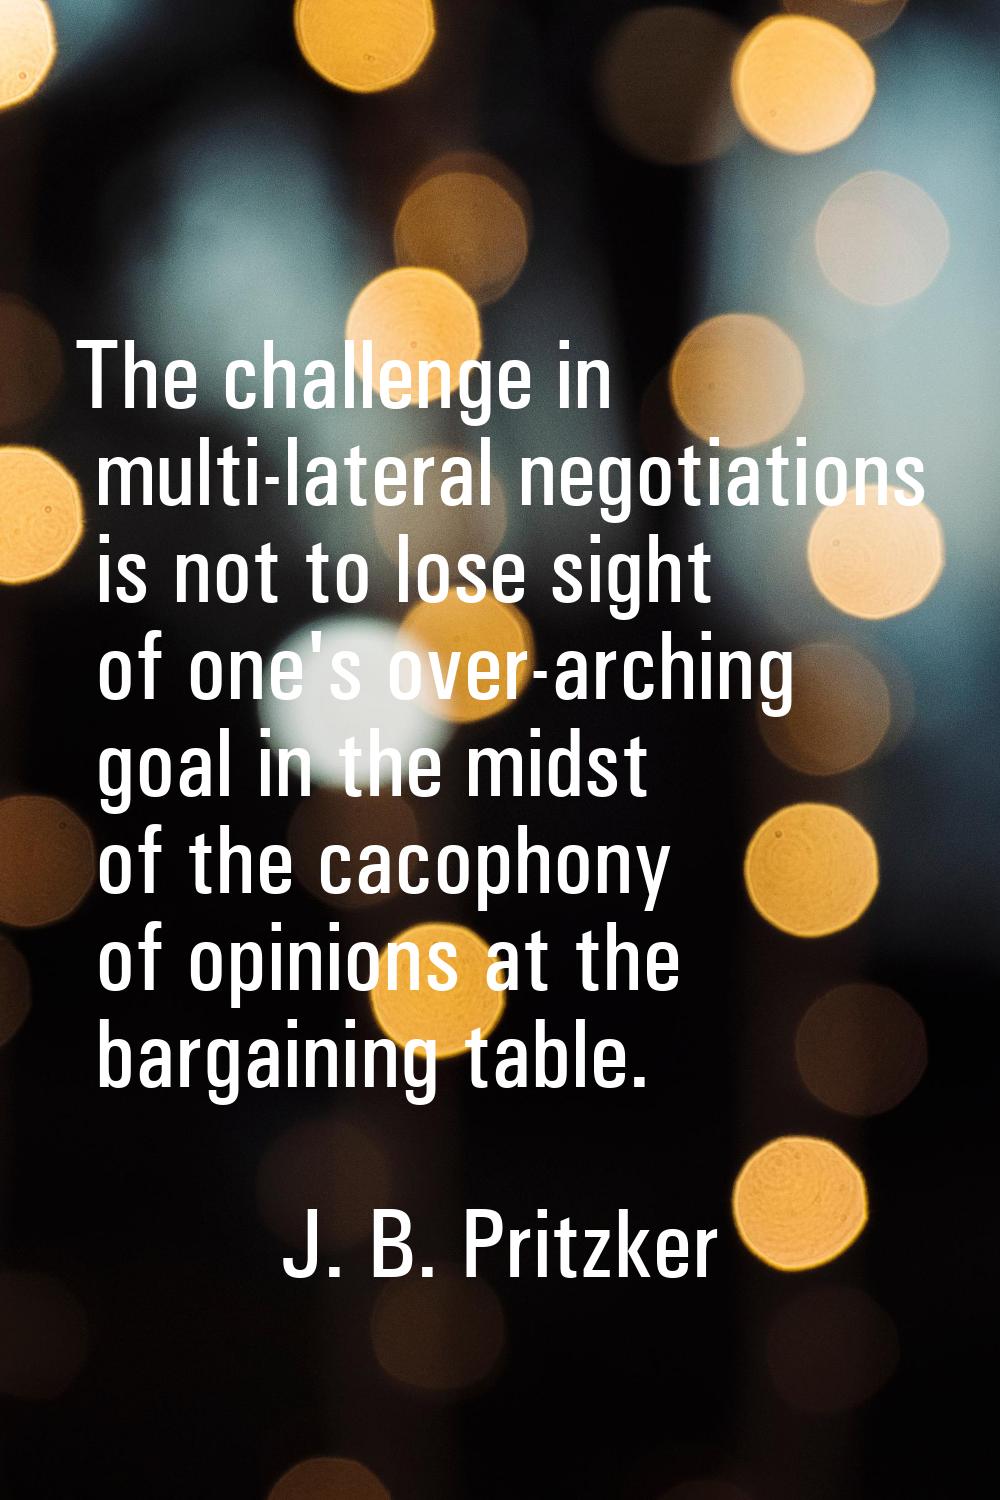 The challenge in multi-lateral negotiations is not to lose sight of one's over-arching goal in the 